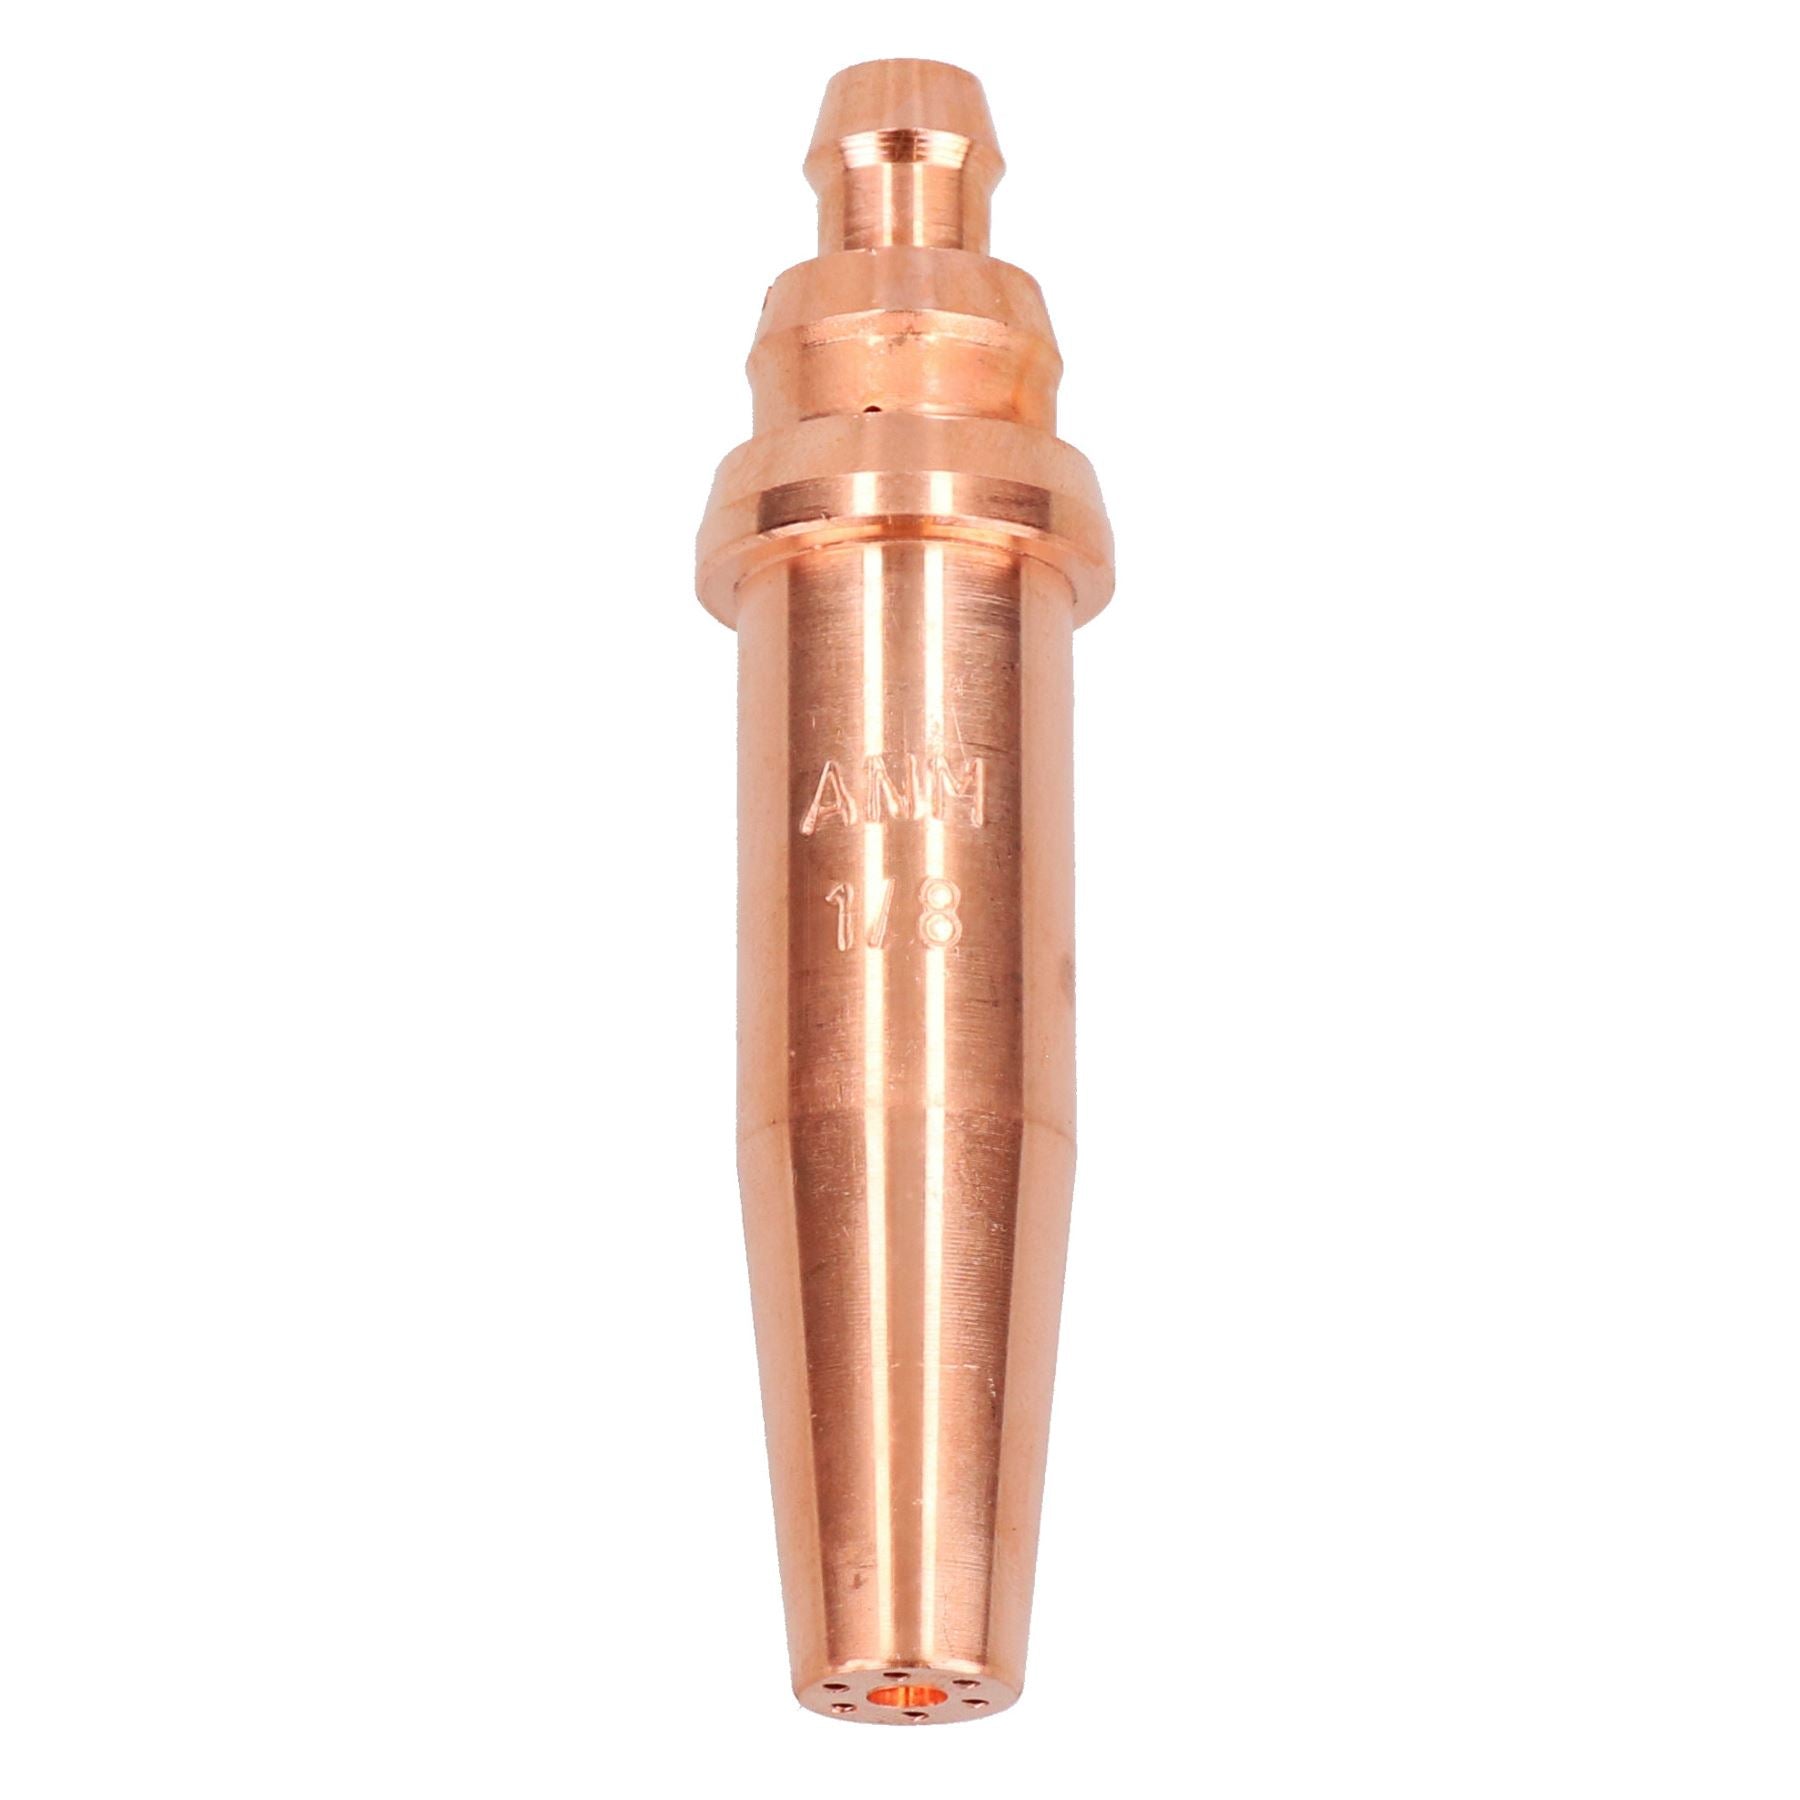 ANM Oxy Acetylene Gas Cutting Nozzle Tip Standard length 1/32" - 1/16" Oxygen